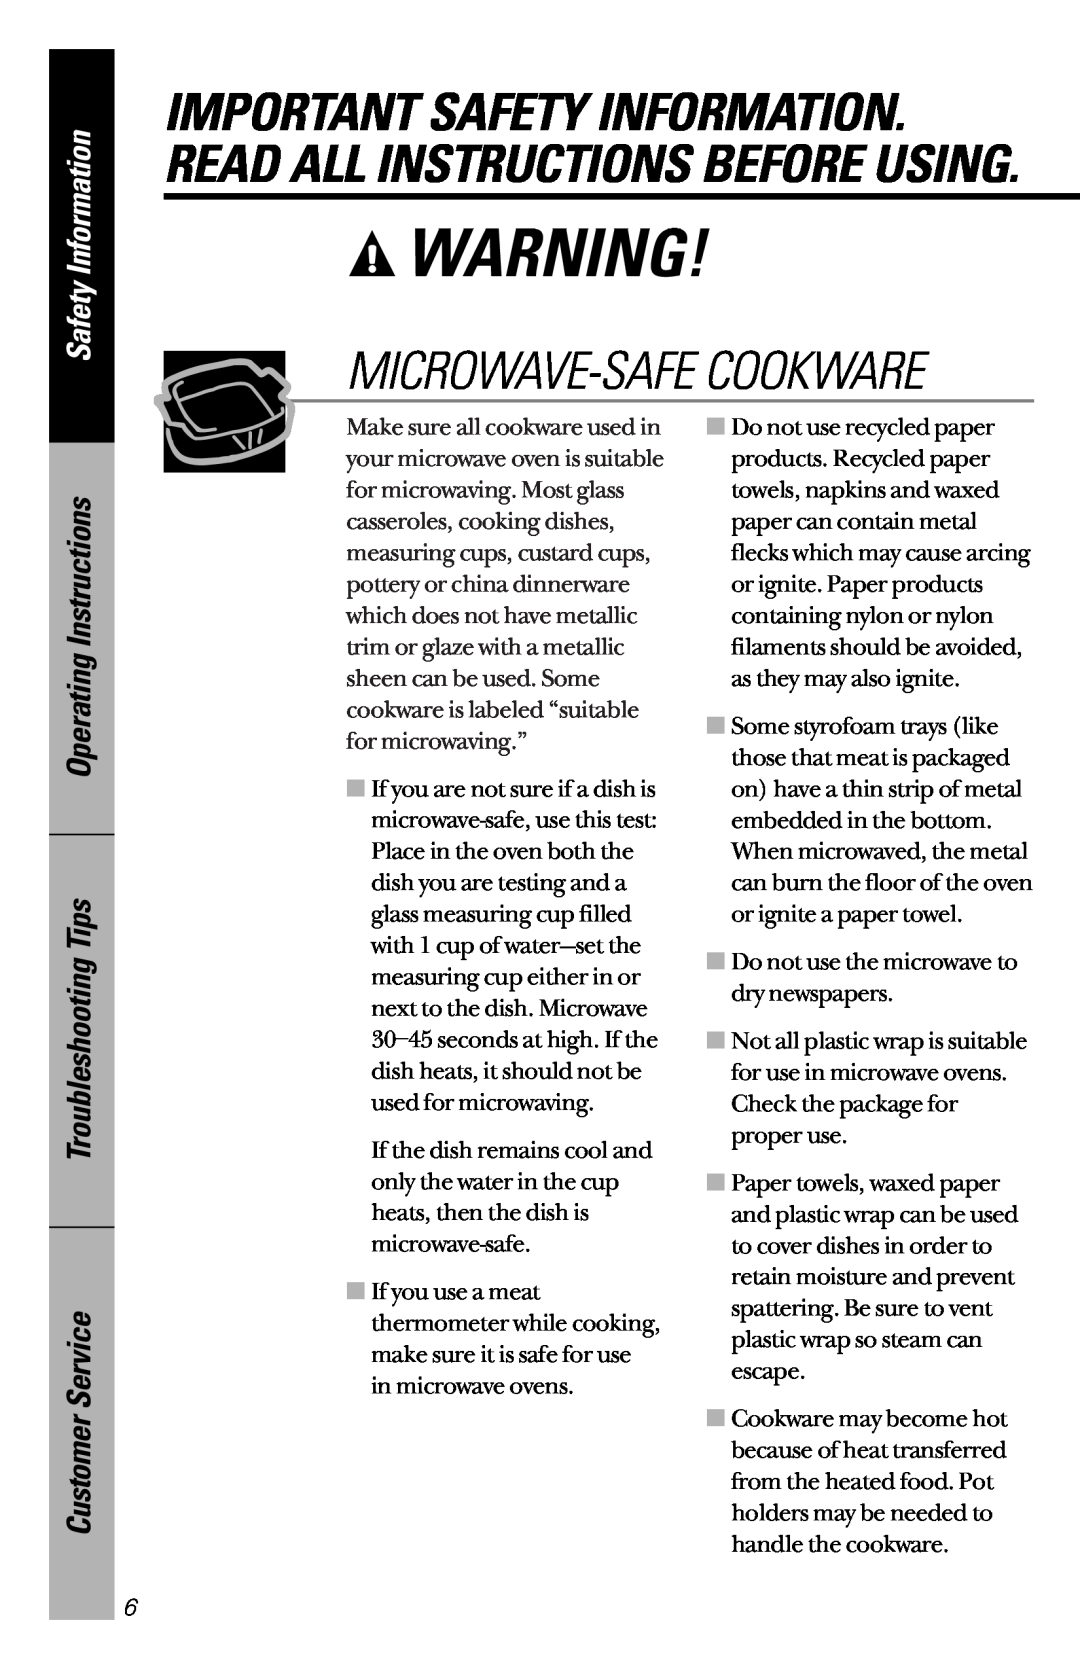 GE JES1339 Microwave-Safecookware, Safety Information, Operating Instructions Troubleshooting Tips, Customer Service 